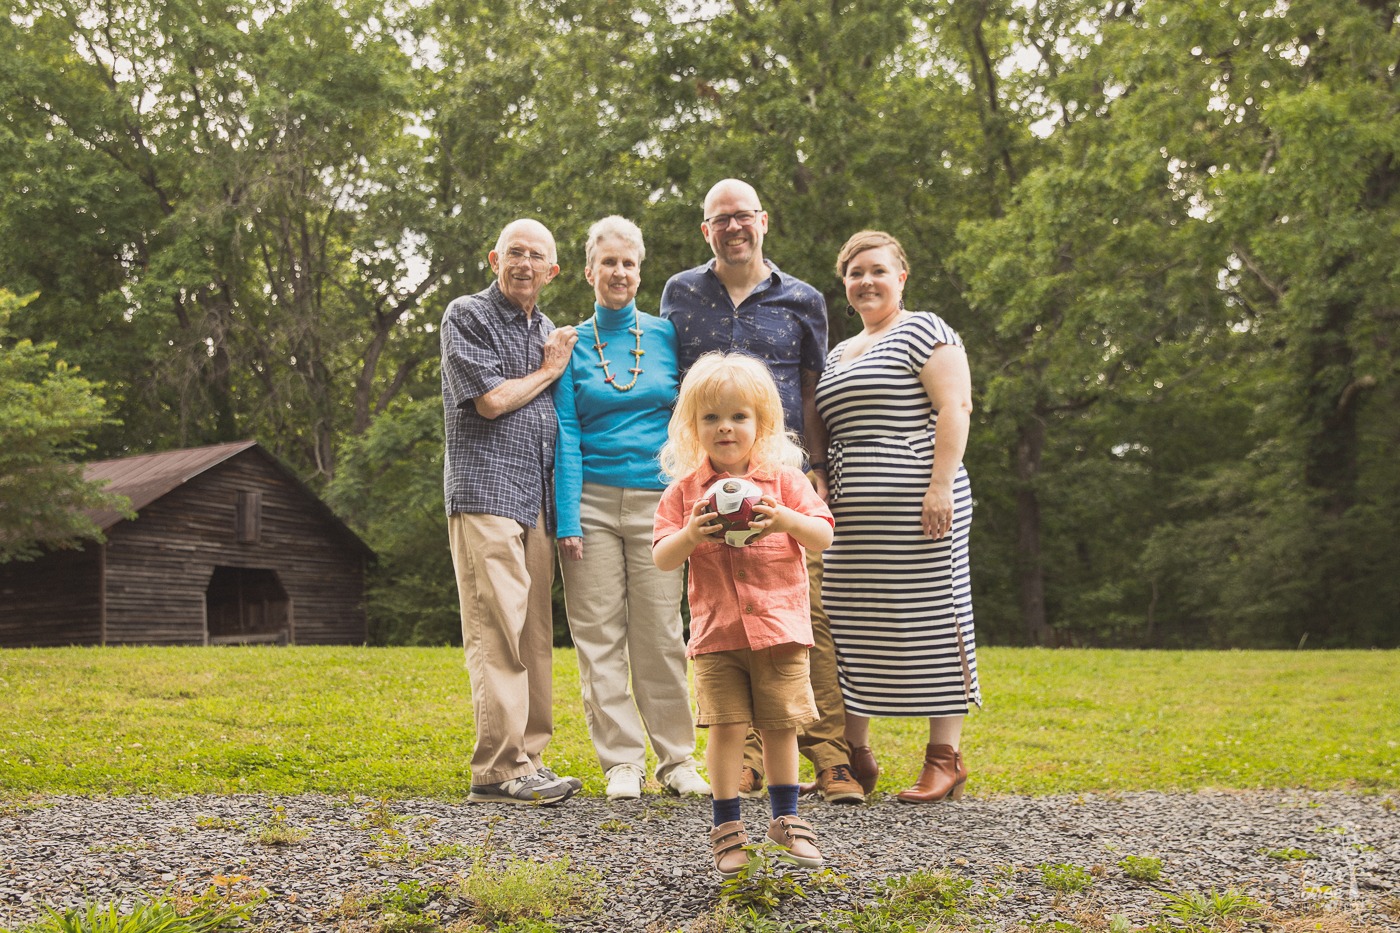 Cute blond toddler boy jumping in front of his parents and grandparents for multi-generational family photos